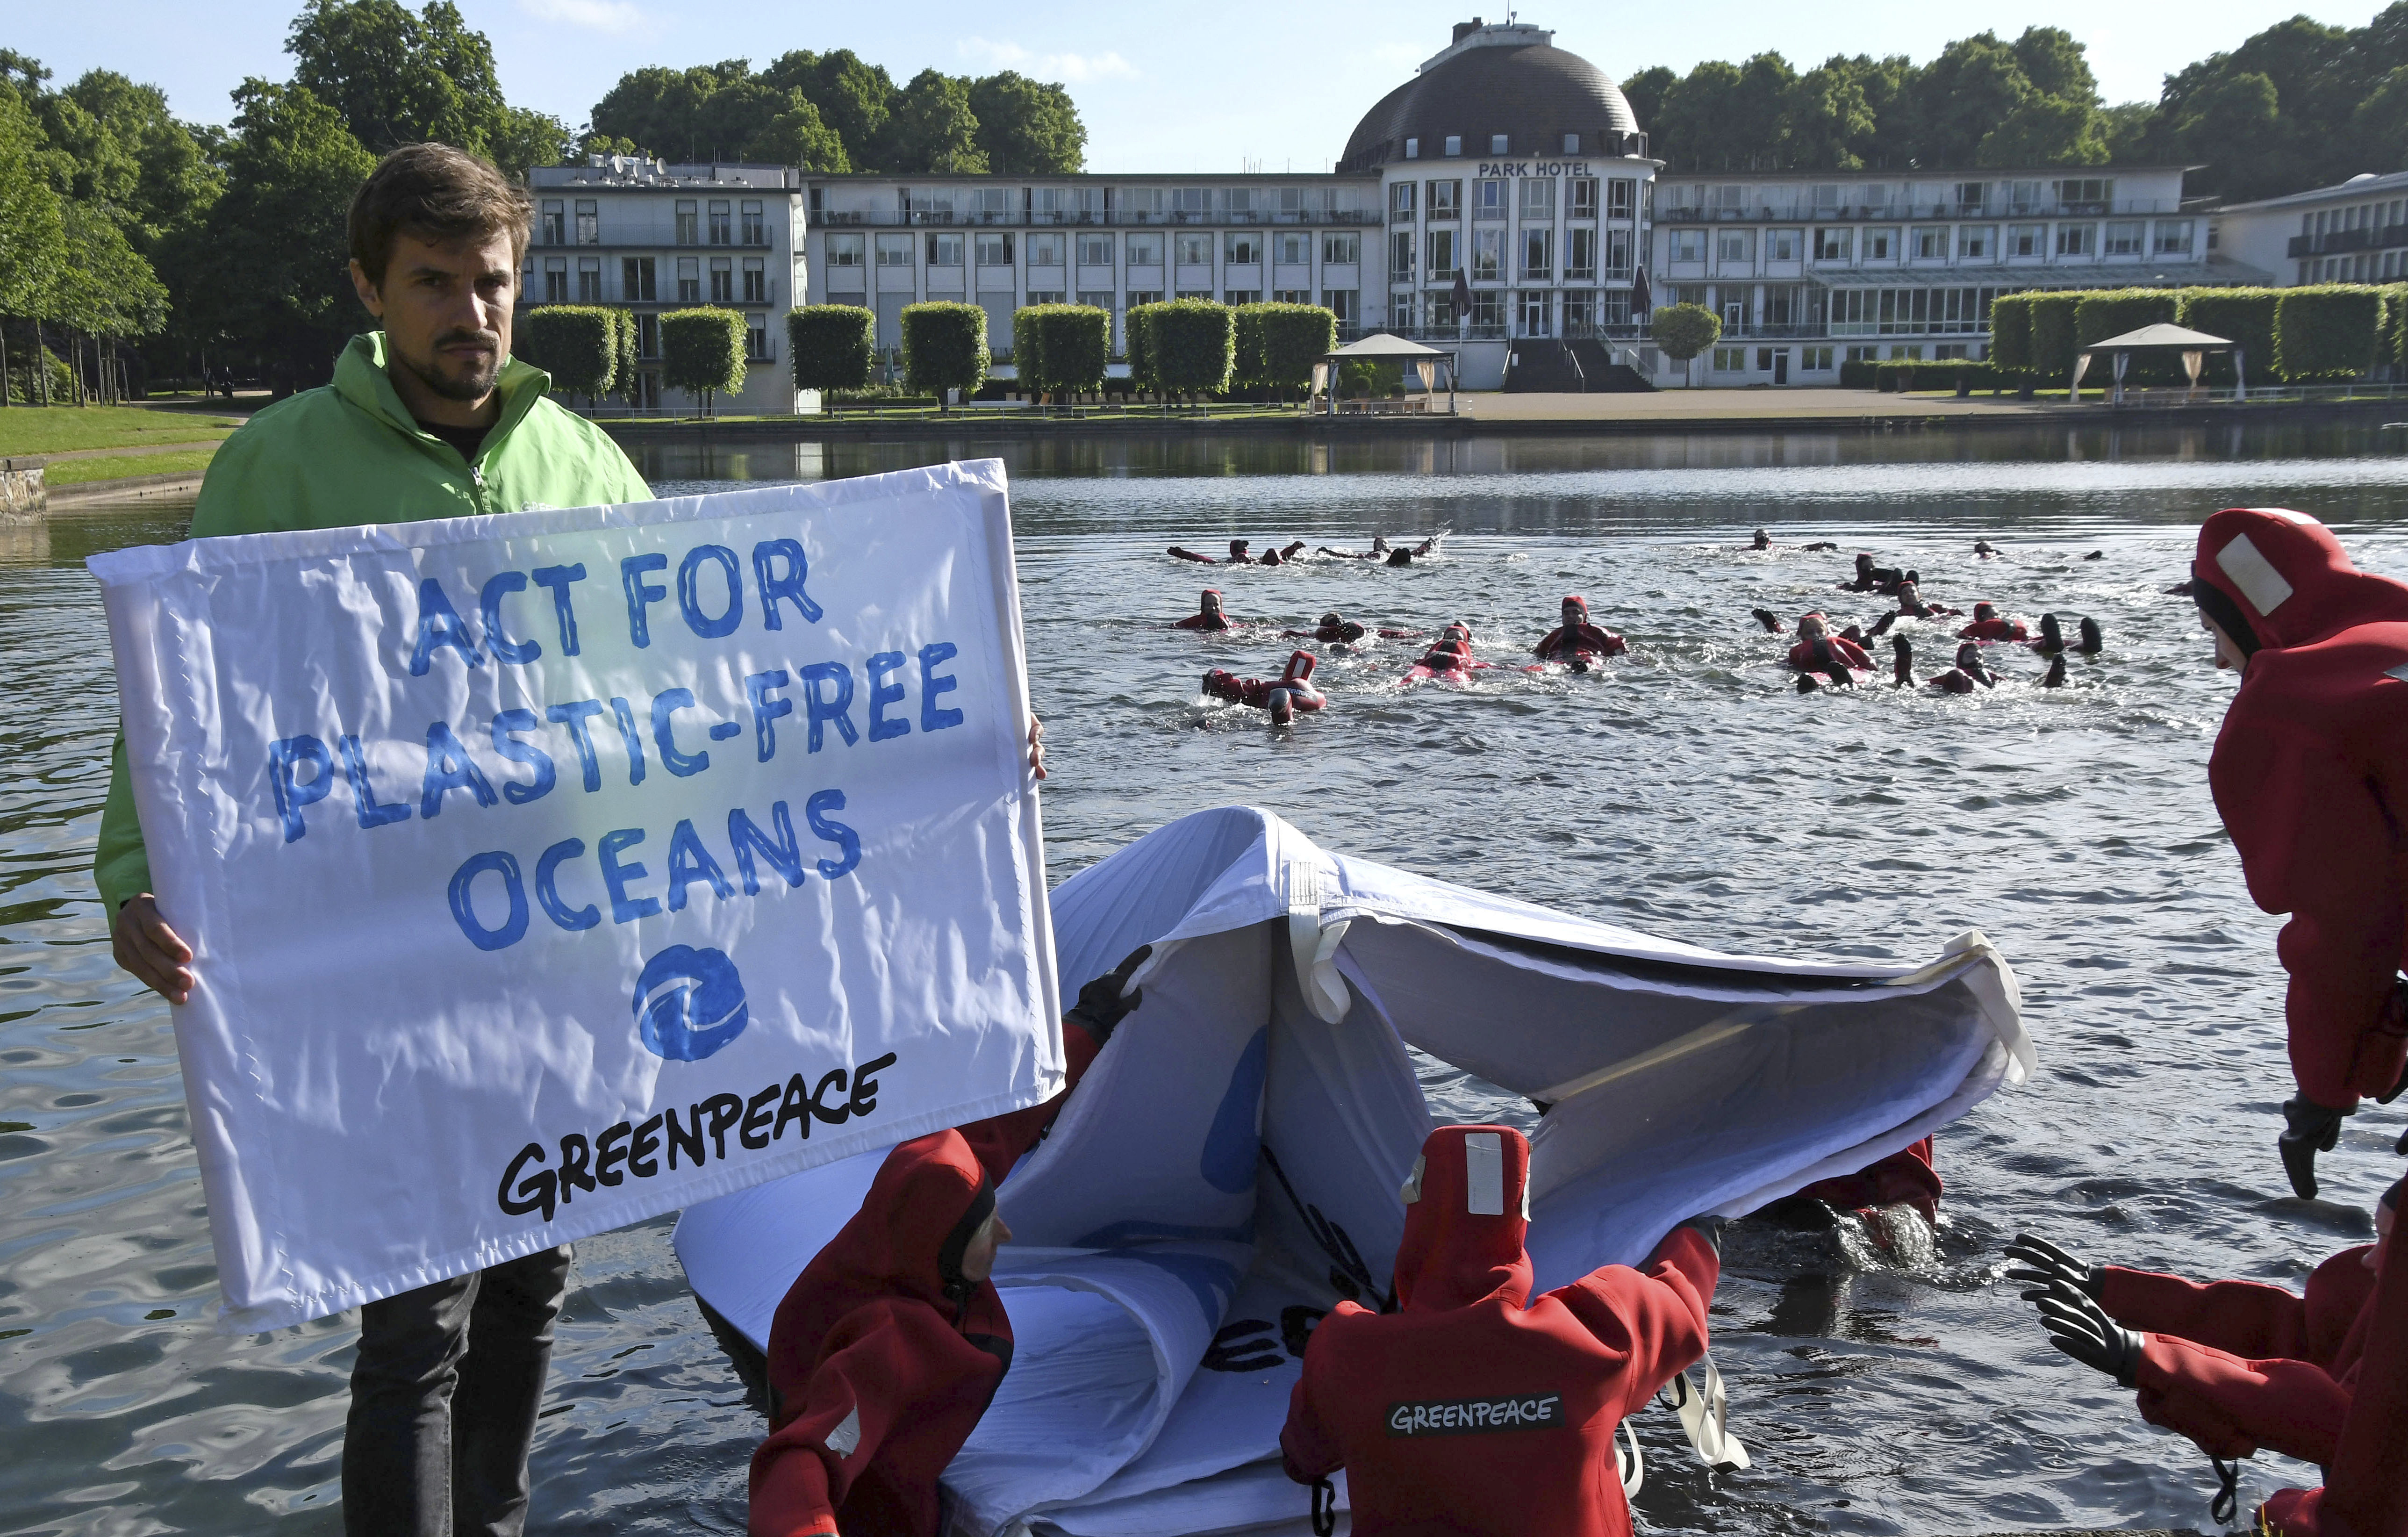 A'Greenpeace activist holding a banner as other activists get into Hollersee lake as part of the campaign 